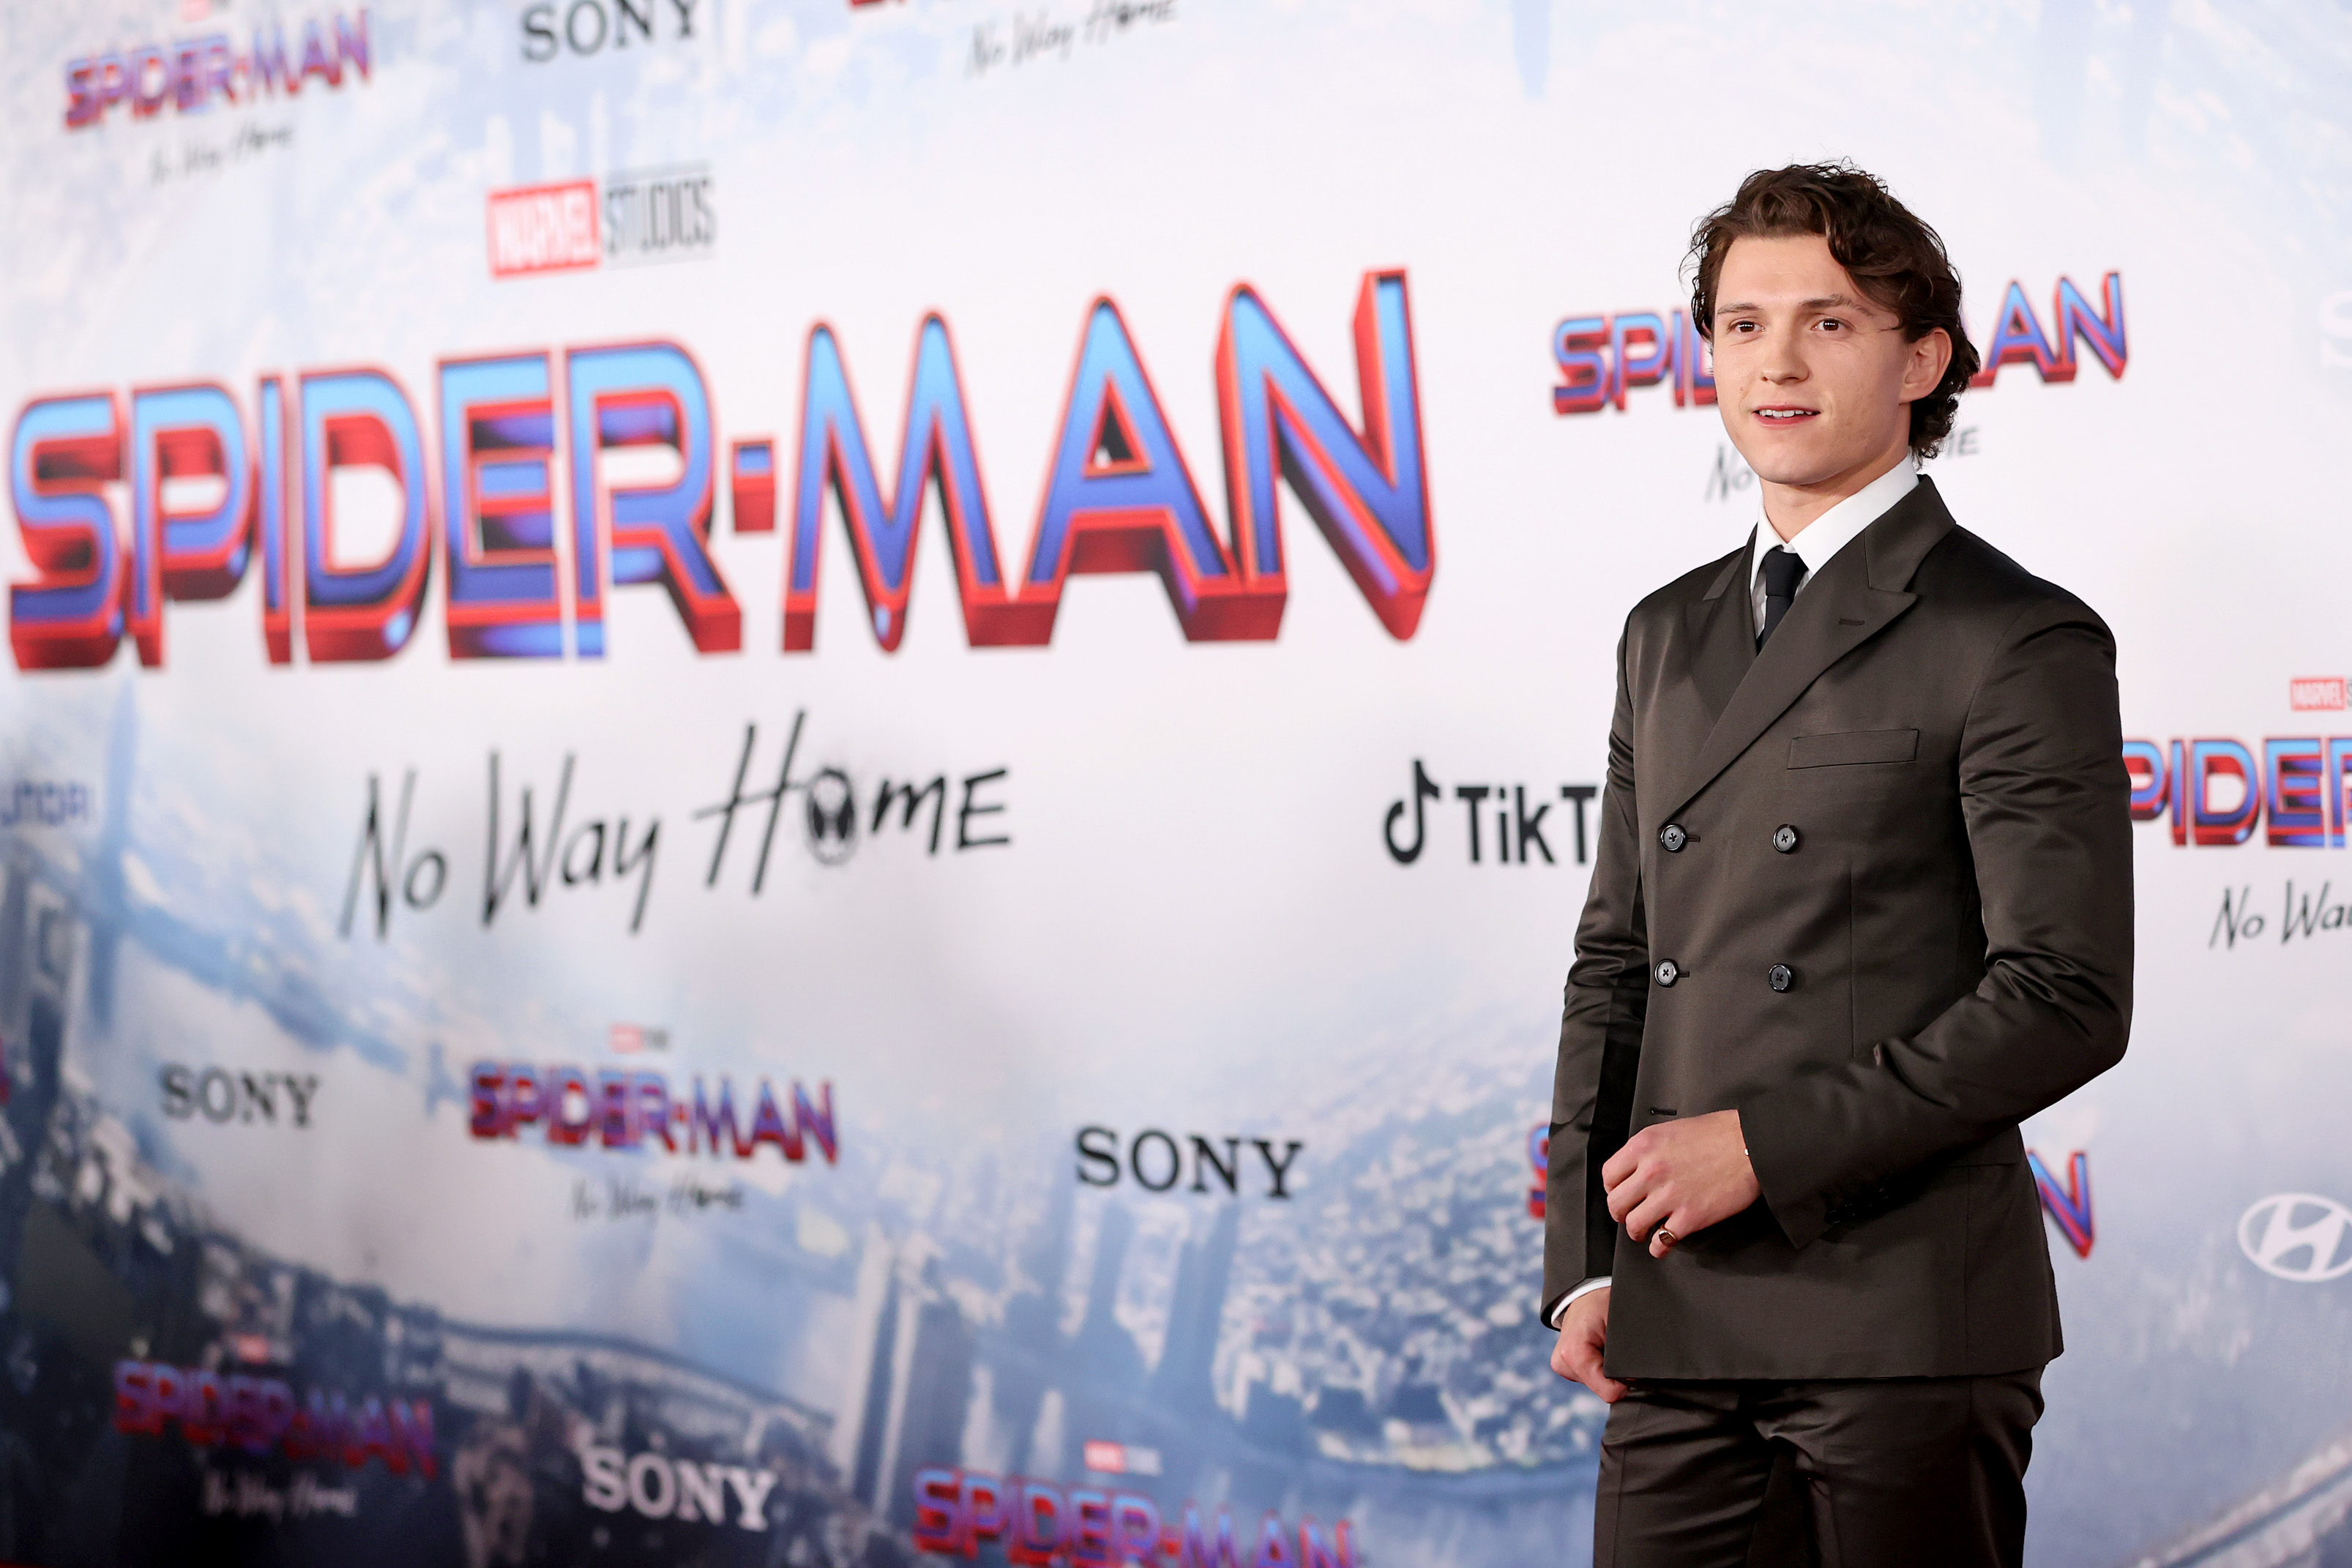 'Spider-Man: No Way Home' star Tom Holland wears a dark gray suit over a white button-up shirt and black tie.